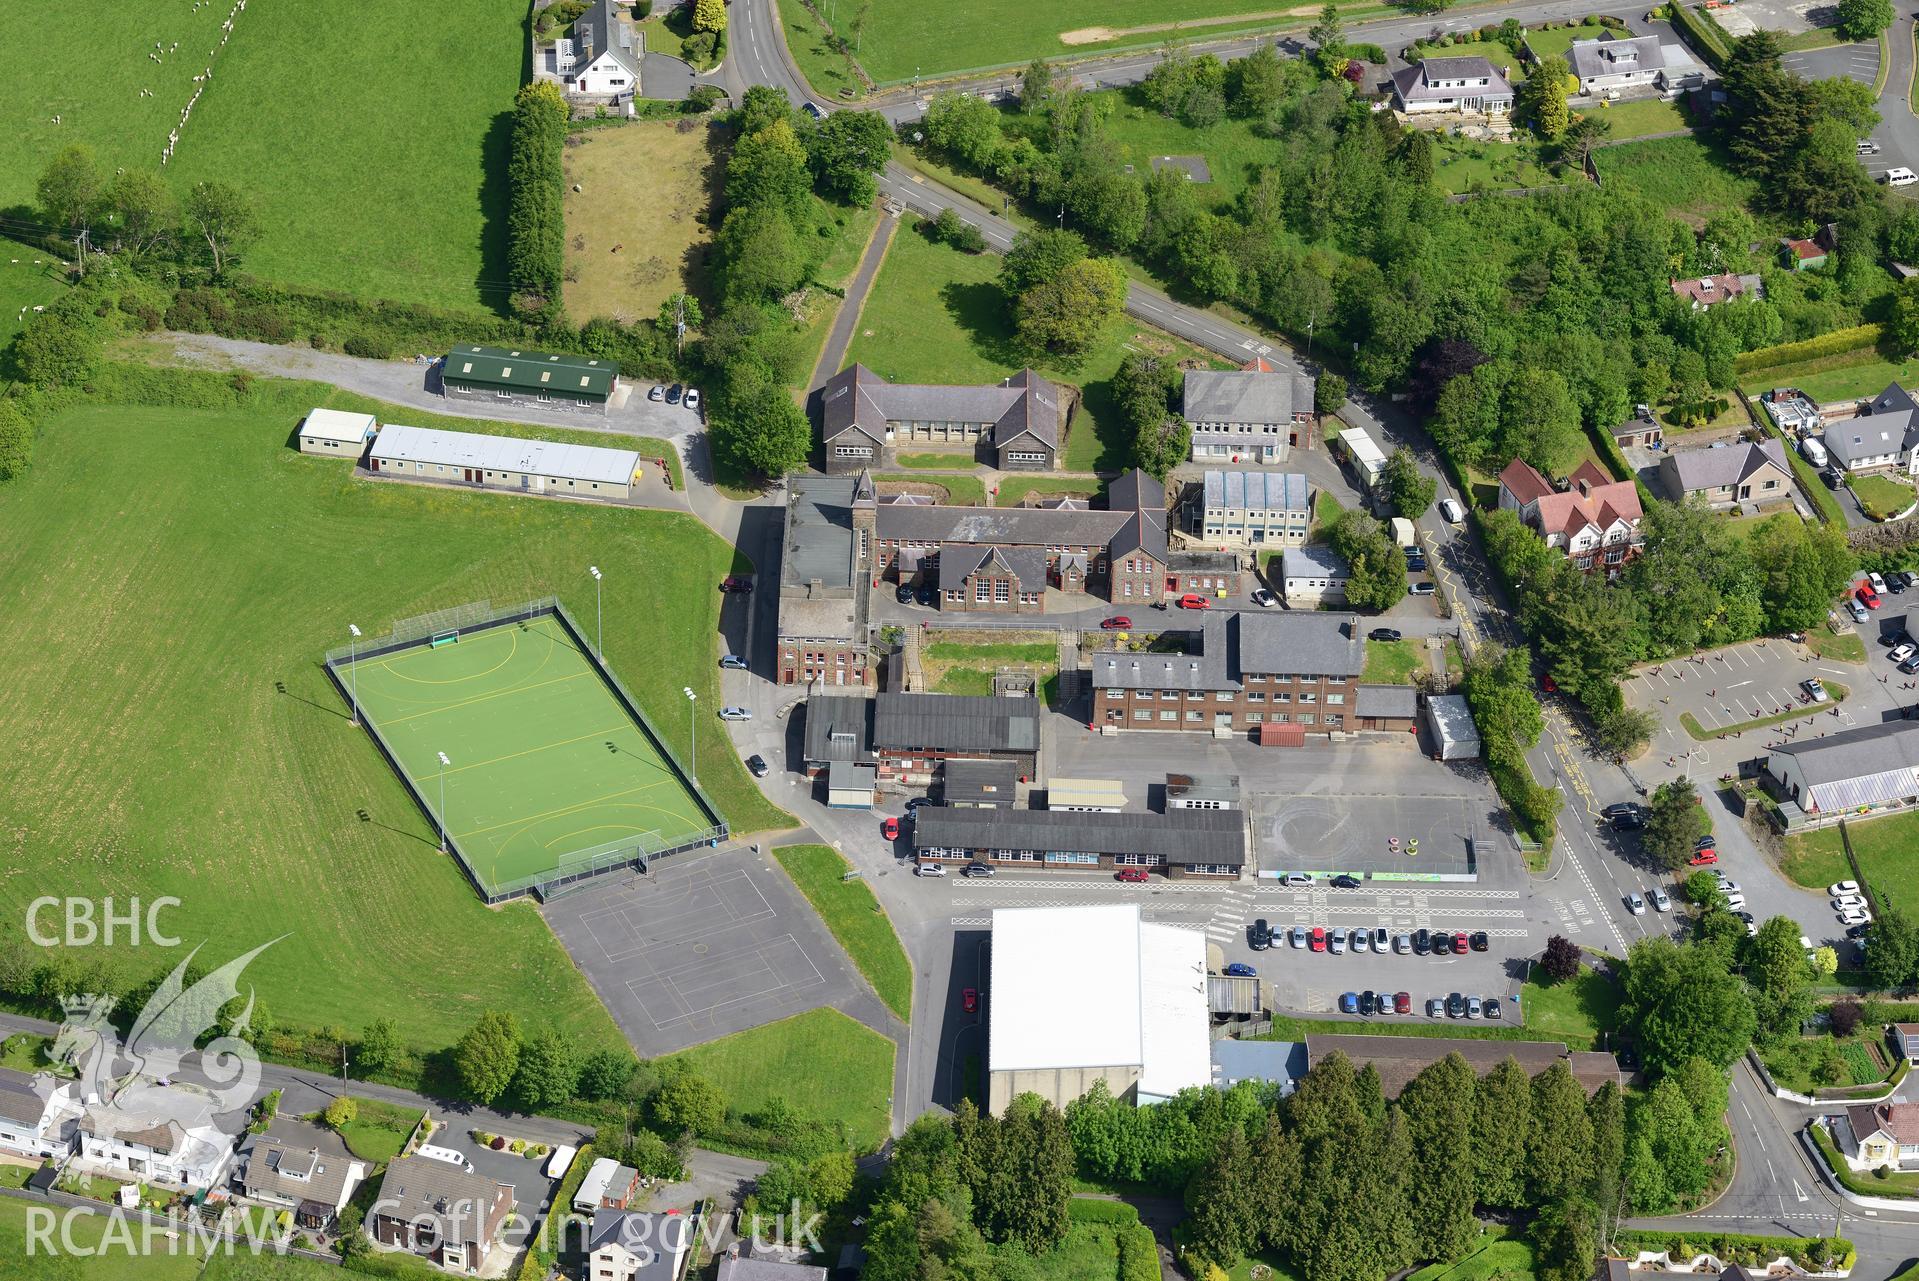 Ysgol Dyffryn Teifi, Llandysul. Oblique aerial photograph taken during the Royal Commission's programme of archaeological aerial reconnaissance by Toby Driver on 3rd June 2015.